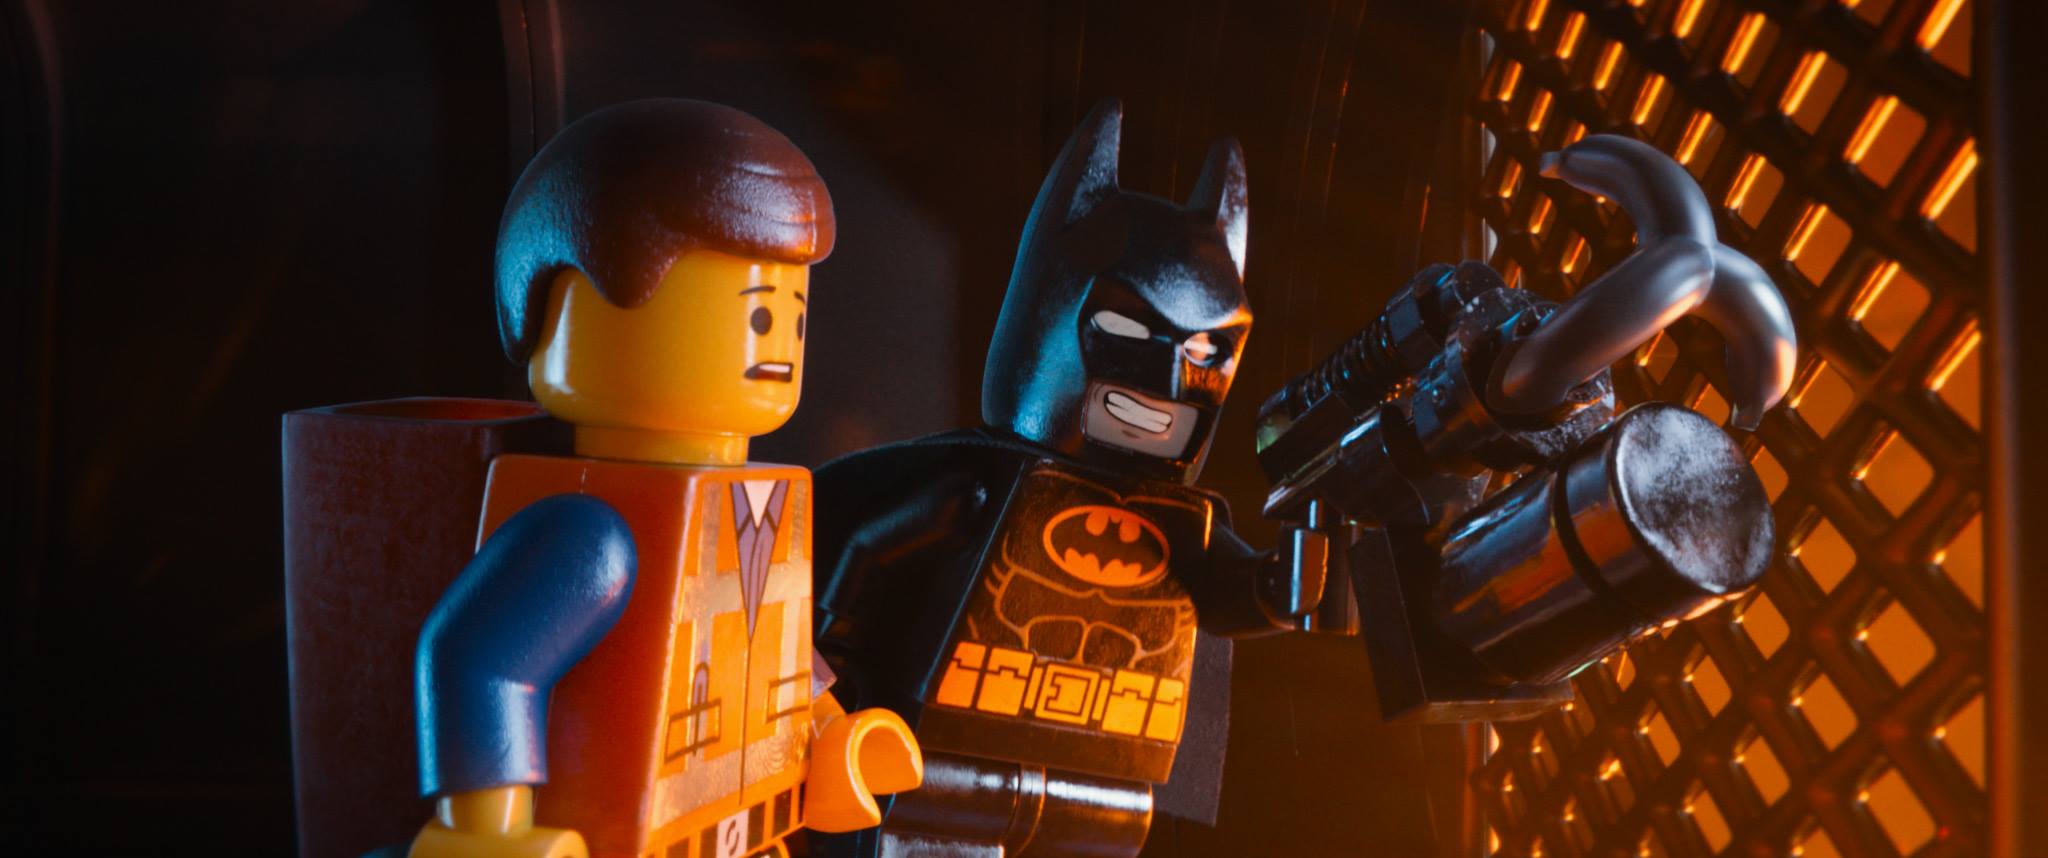 facebook.comEmmet (Chris Pratt) and Batman (Will Arnett) try to save the world as they know it in “The Lego Movie."